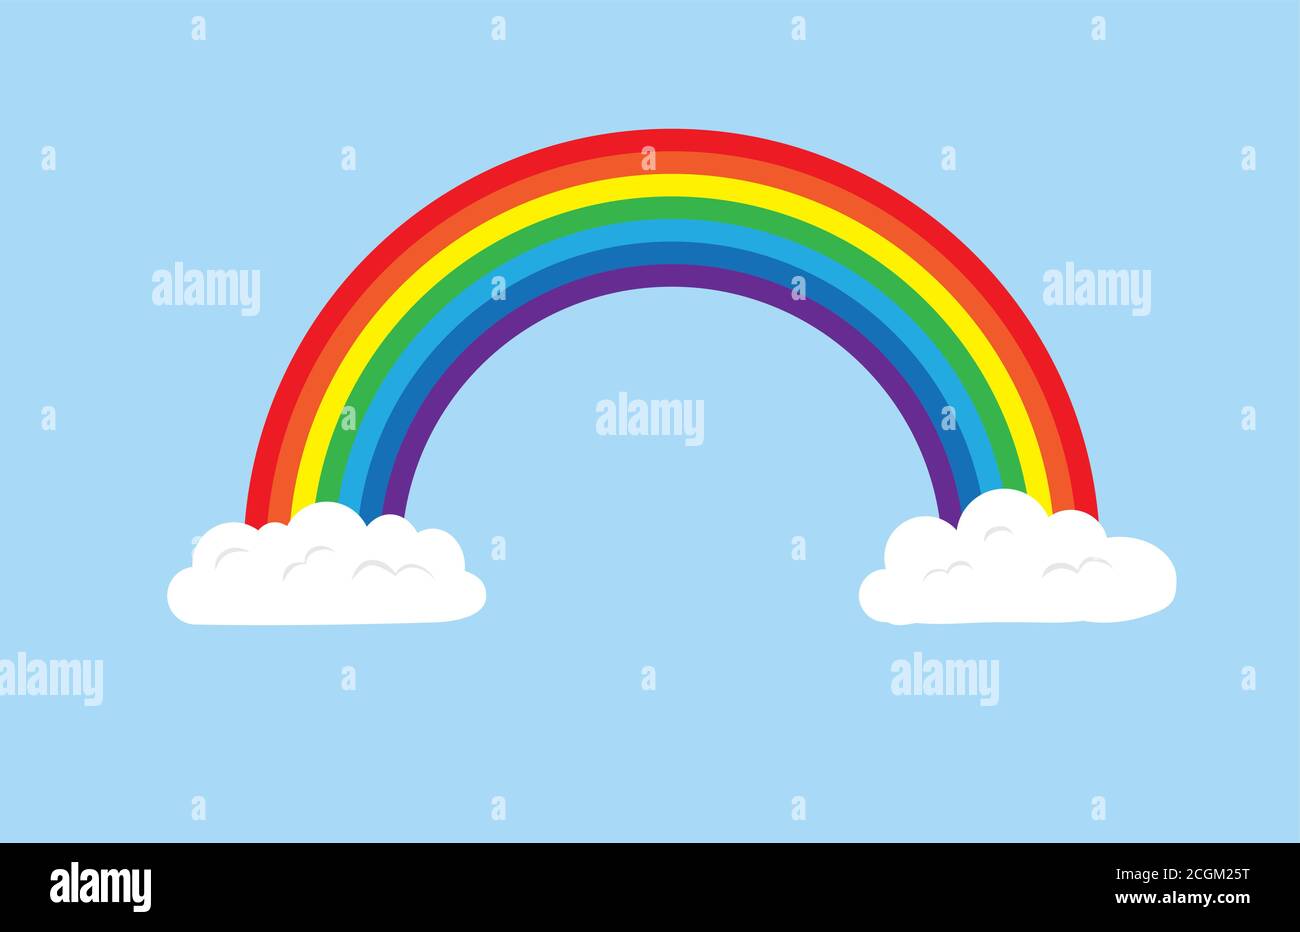 Rainbow coming out of the clouds over a light blue sky Stock Vector